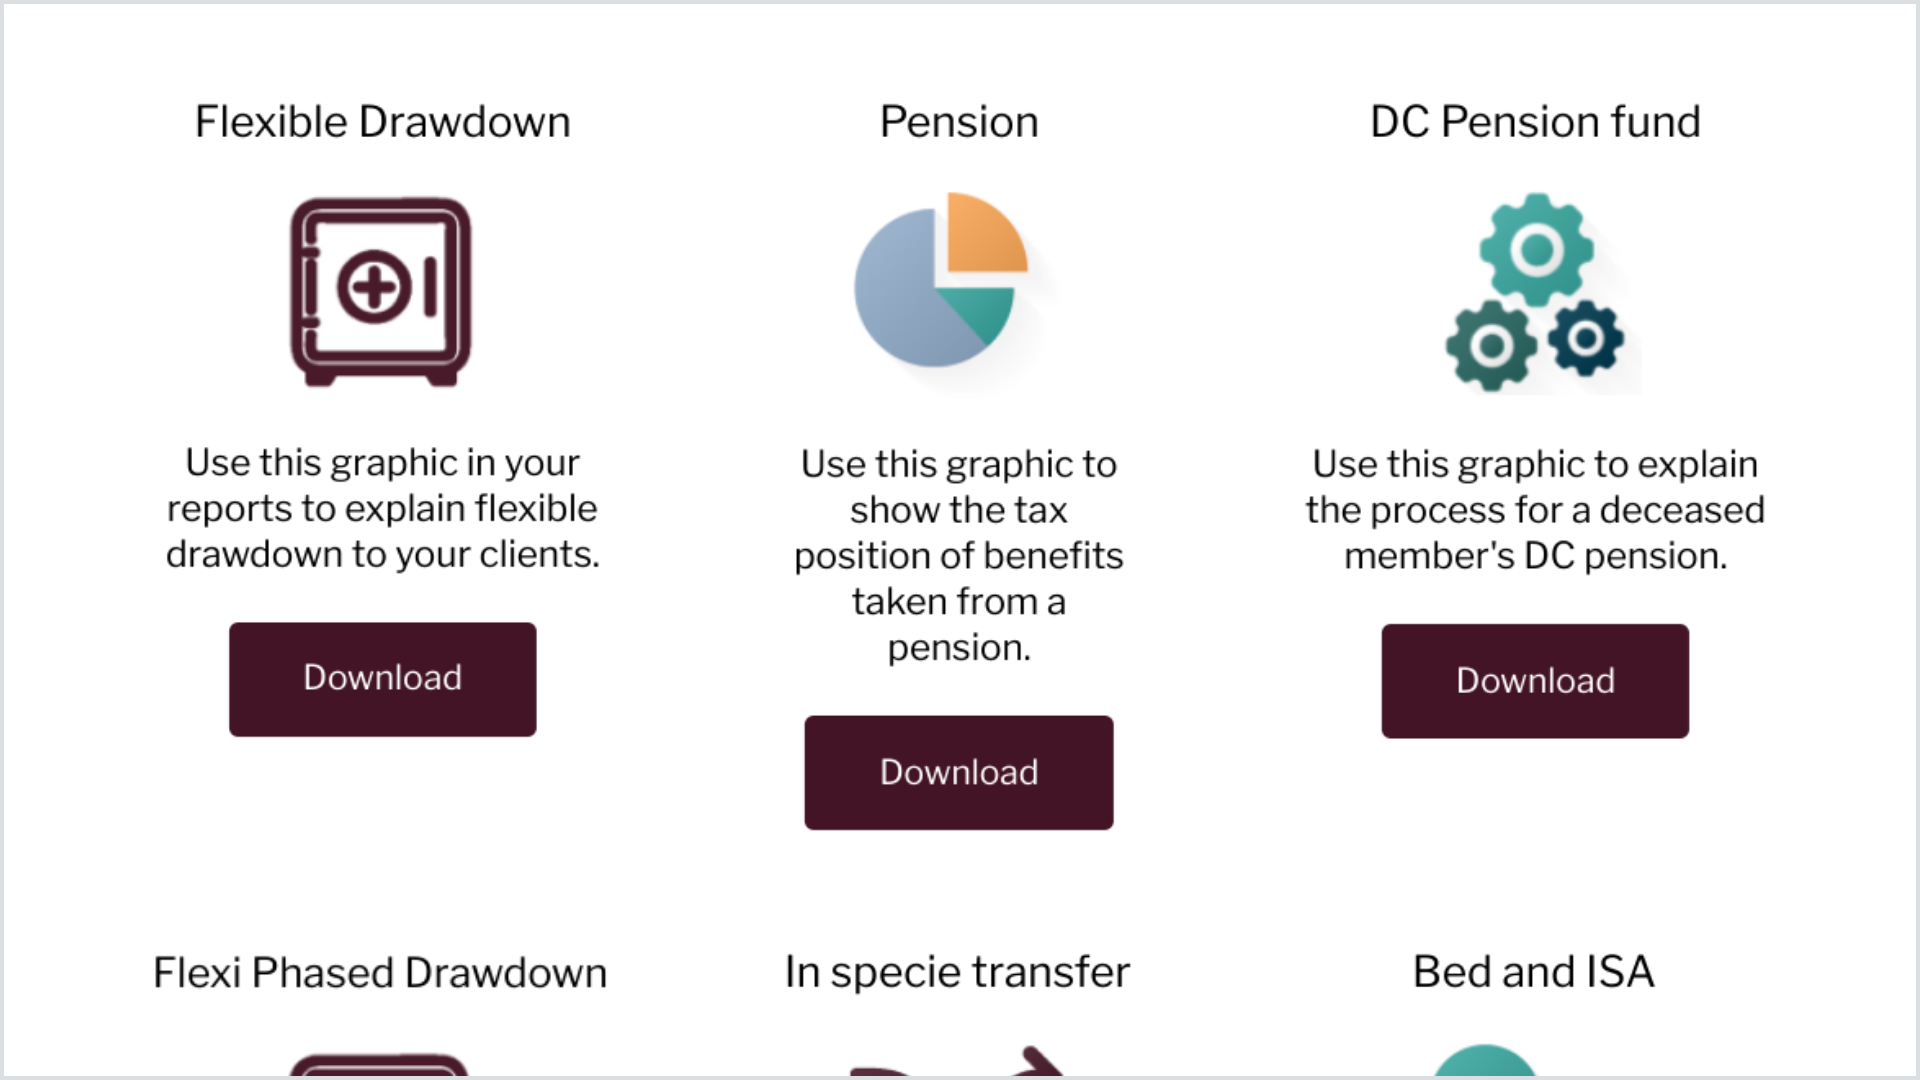 Two rows of icons are set across three columns. The top row is fully visible and from left to right: Heading is Flexi phased drawdown, beneath it is a line drawing of a bank safe. Beneath the bank safe are the words 'Use this graphic in your reports to explain flexible drawdown to your clients.' Beneath the text is a download button. The next heading is 'Pension' beneath which is a three-segment pie chart beneath which is the following text: Use this graphic to show the tax position of benefits taken from a pension and a download button underneath. Next the heading reads: DC pension fund beneath which is an icon showing three interlocking engine cogs - one large cog sits above two smaller cogs that are side-by-side. Beneath the image is the following text: Use this graphic to explain the process for a deceased member's DC pension. Beneath that, a download button.